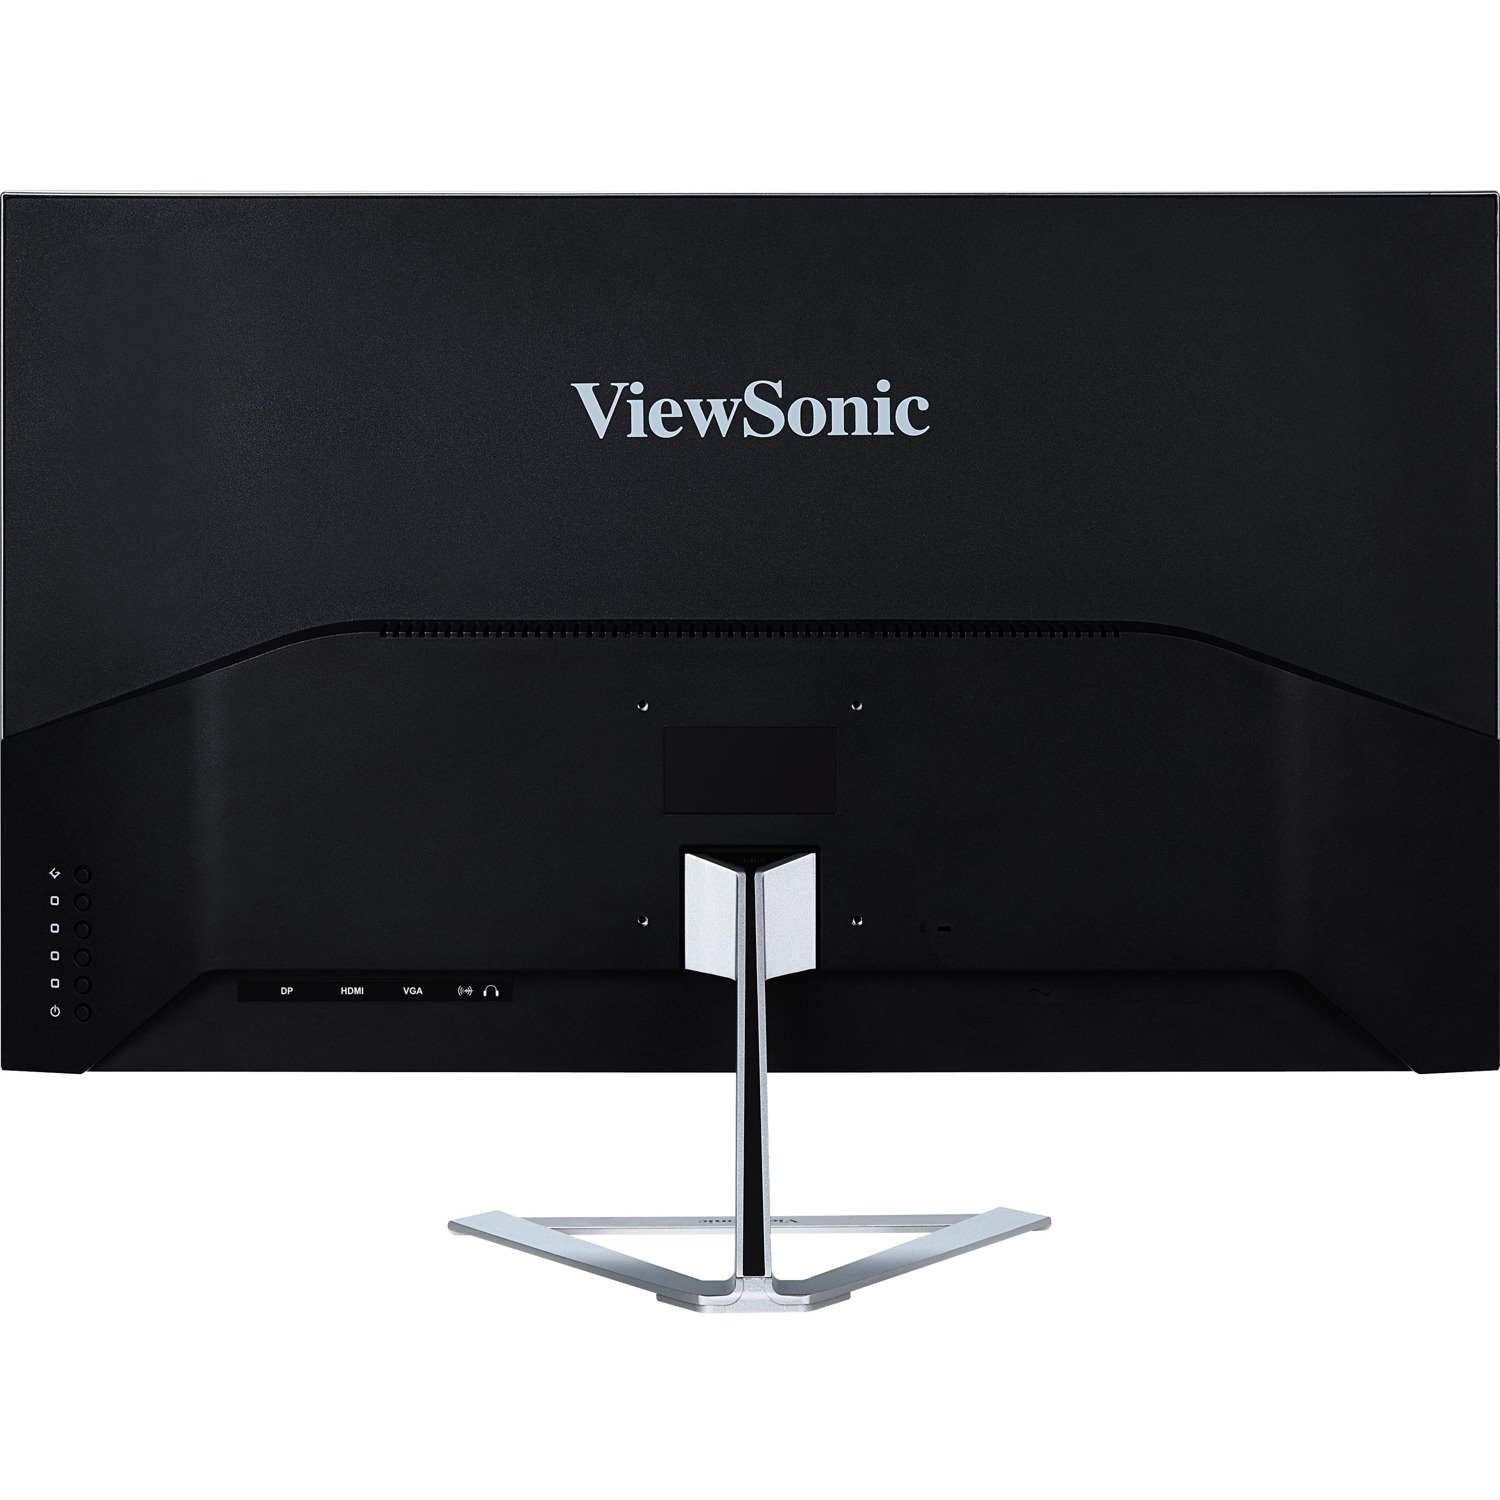 ViewSonic VX3276-MHD 32 Inch 1080p Widescreen IPS Monitor with Ultra-Thin Bezels, Screen Split Capability HDMI and DisplayPort